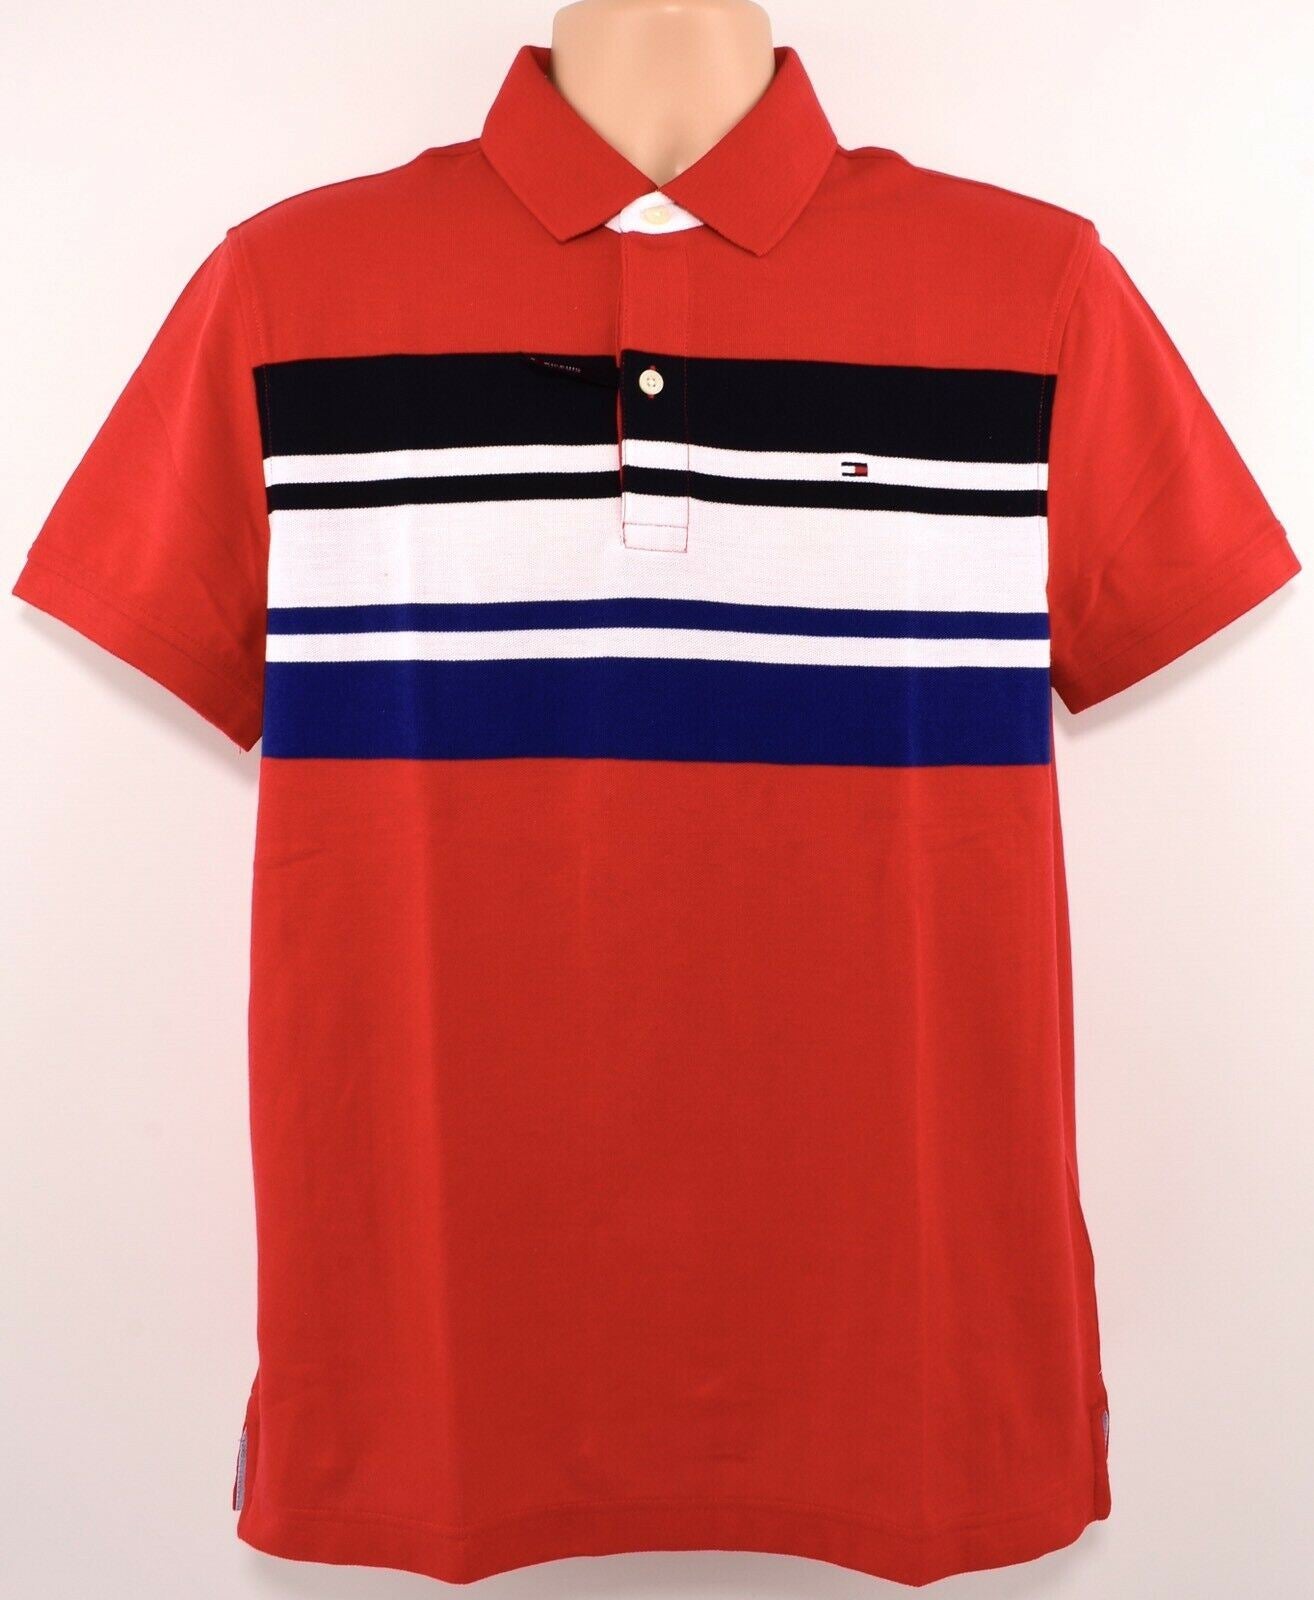 TOMMY HILFIGER Men's PERFORMANCE Polo Shirt, Red/Striped, size MEDIUM